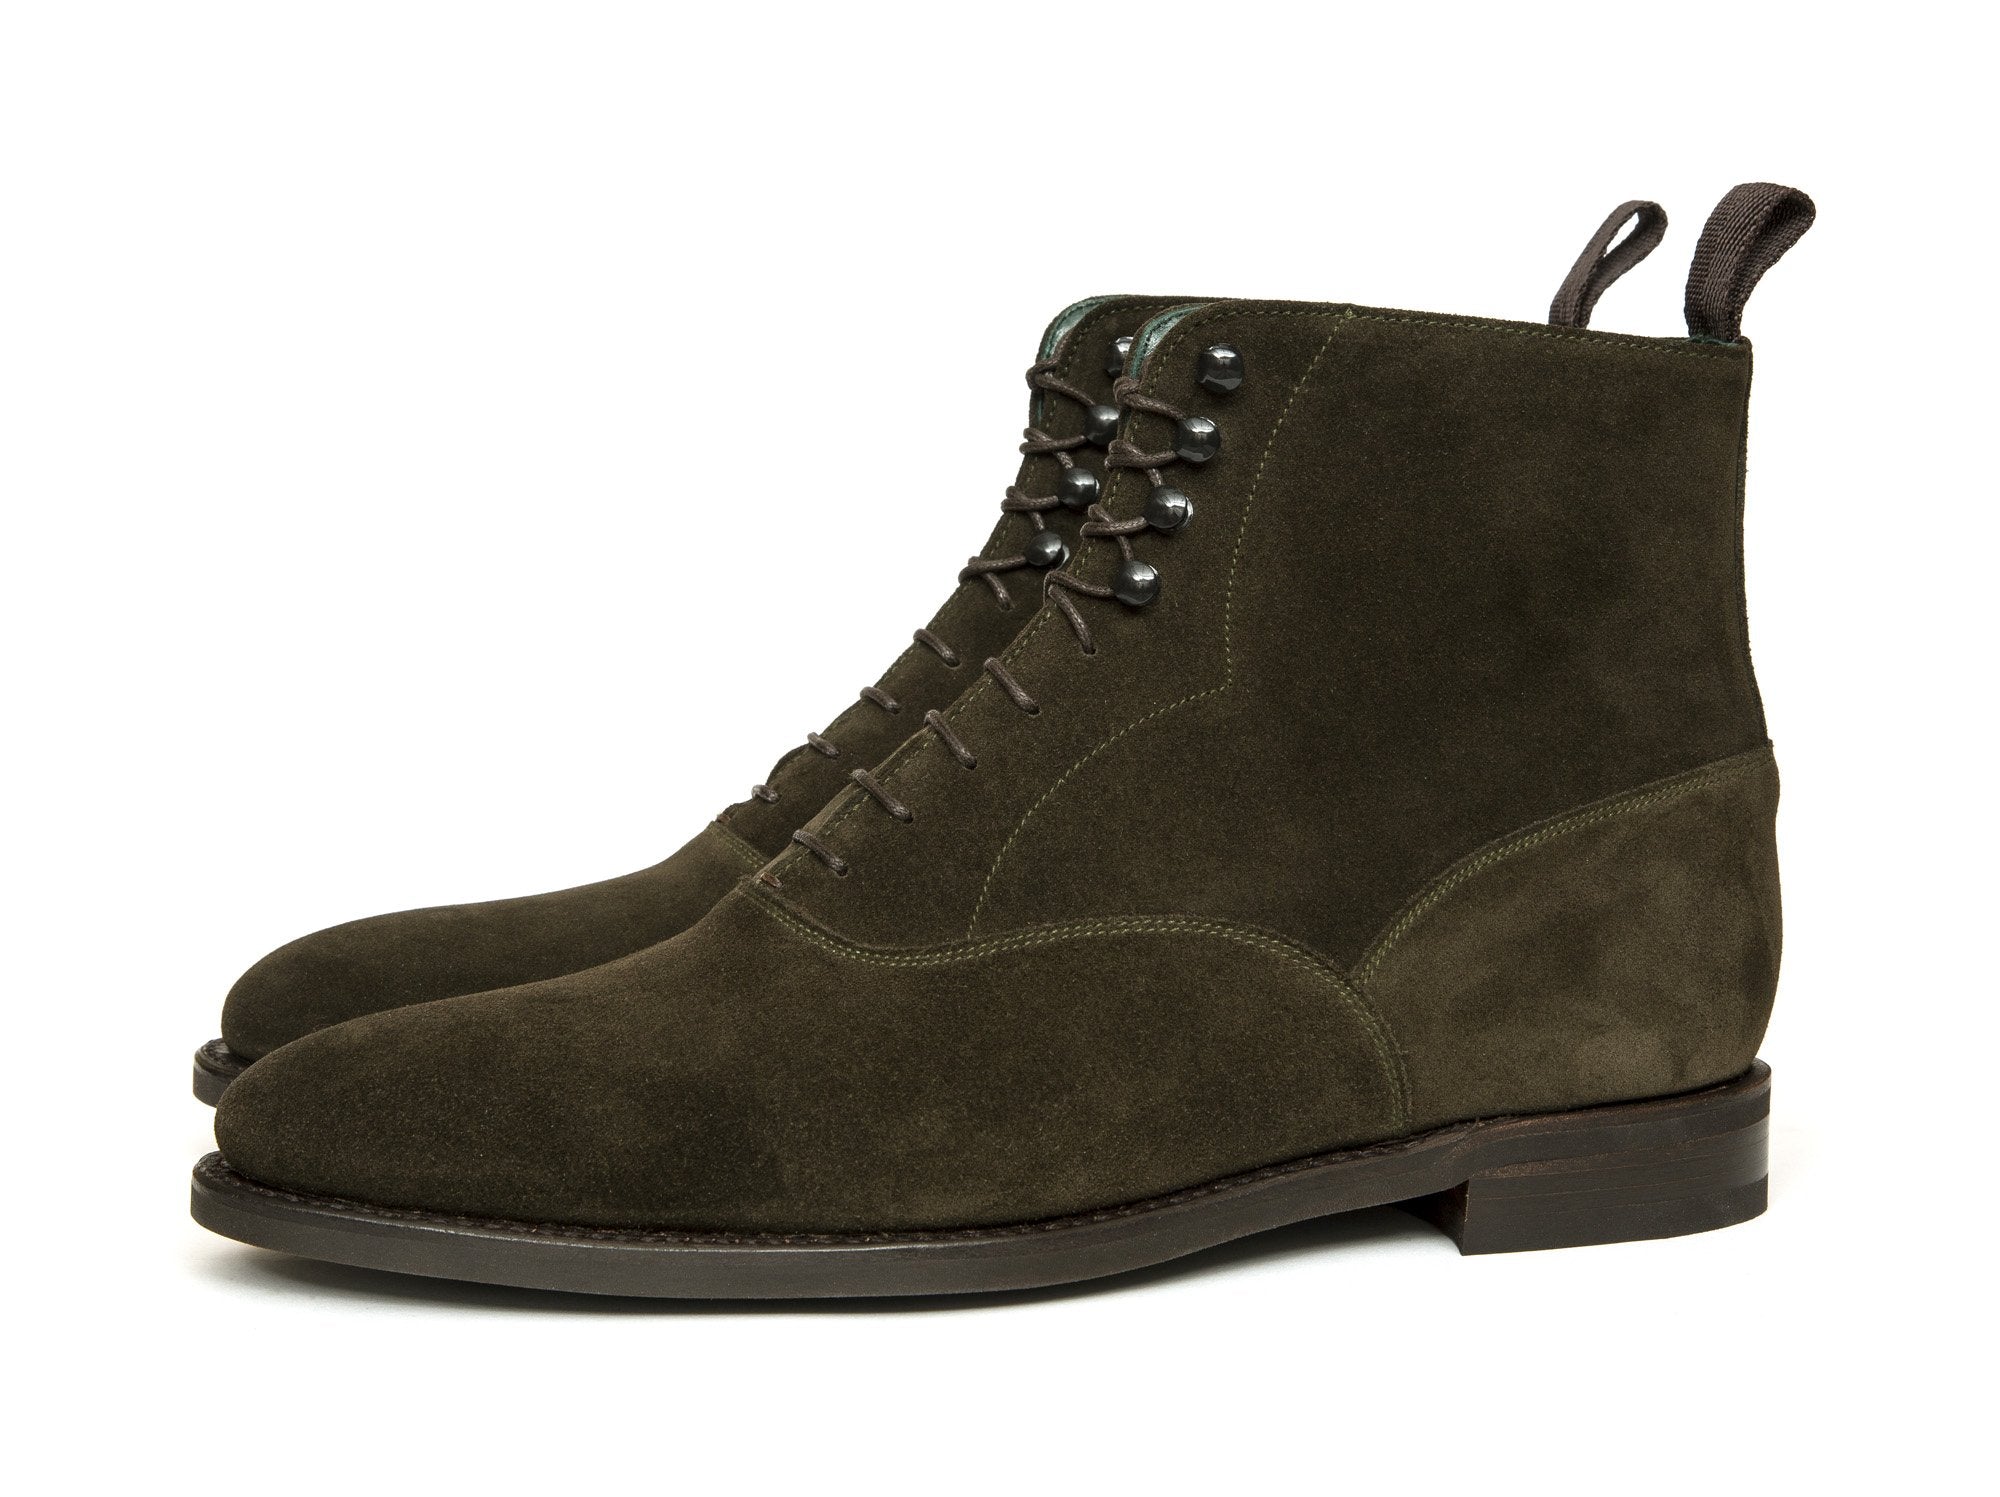 Wedgwood - MTO - Moss Suede - TMG Last - Country Rubber Sole